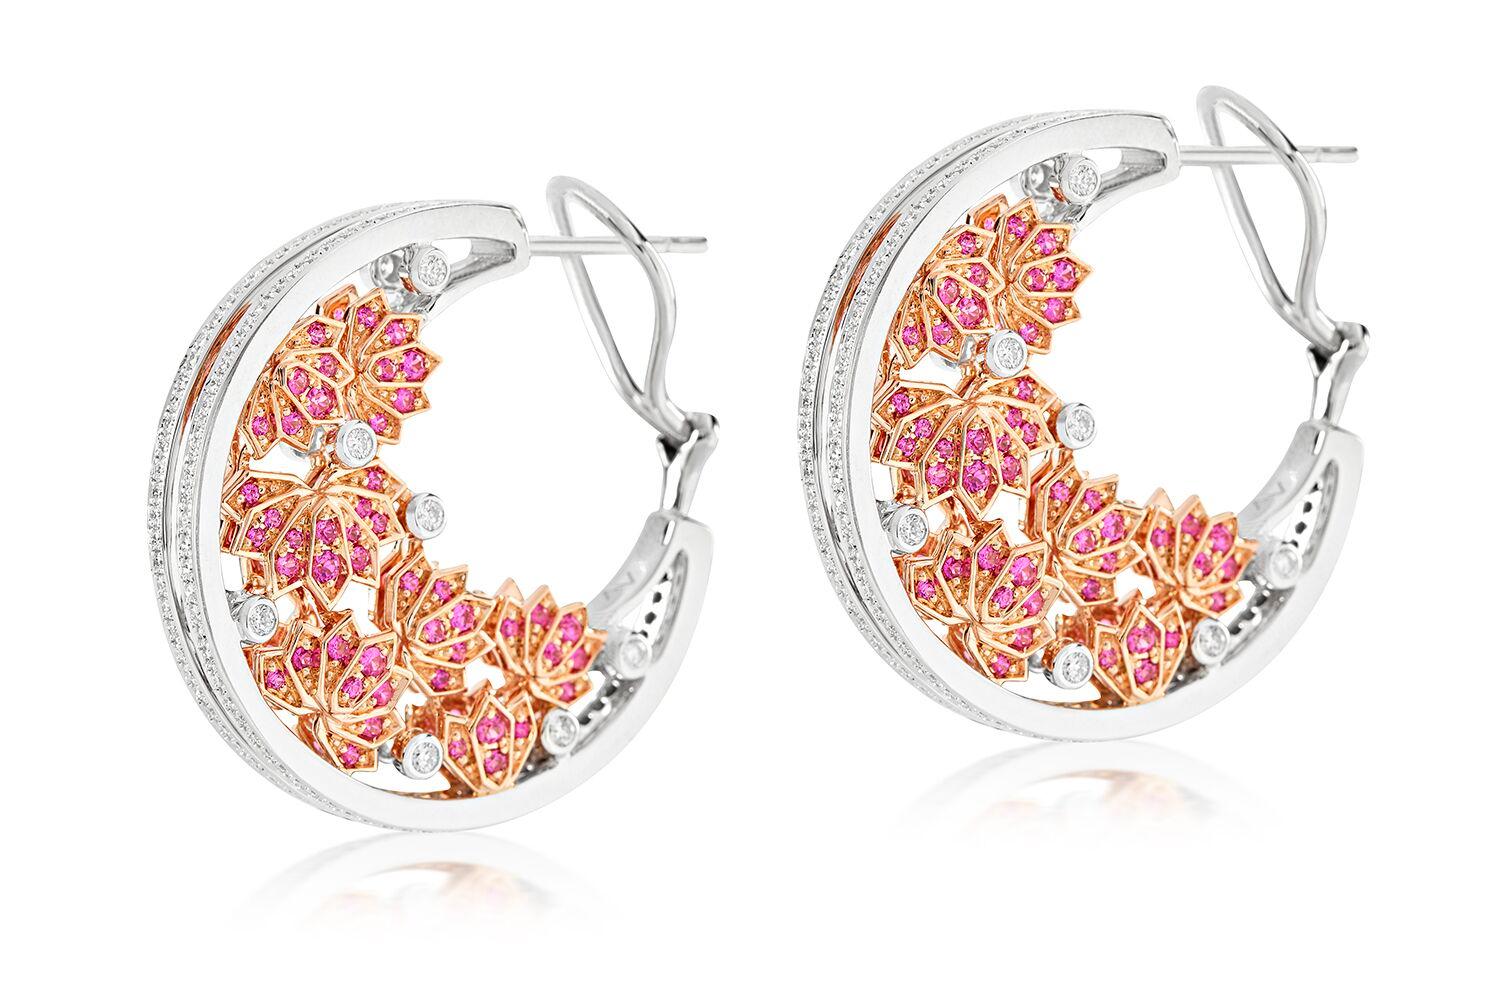 ANANYA LOTUS SAMSARA EARRINGS SET WITH PINK SAPPHIRES AND DIAMONDS


Set in 18K White gold and Rose gold


Total diamond weight: 1.74 ct
Color: F-G
Clarity: VVS1

Total pink sapphire weight: 1.76 ct

32mm drop